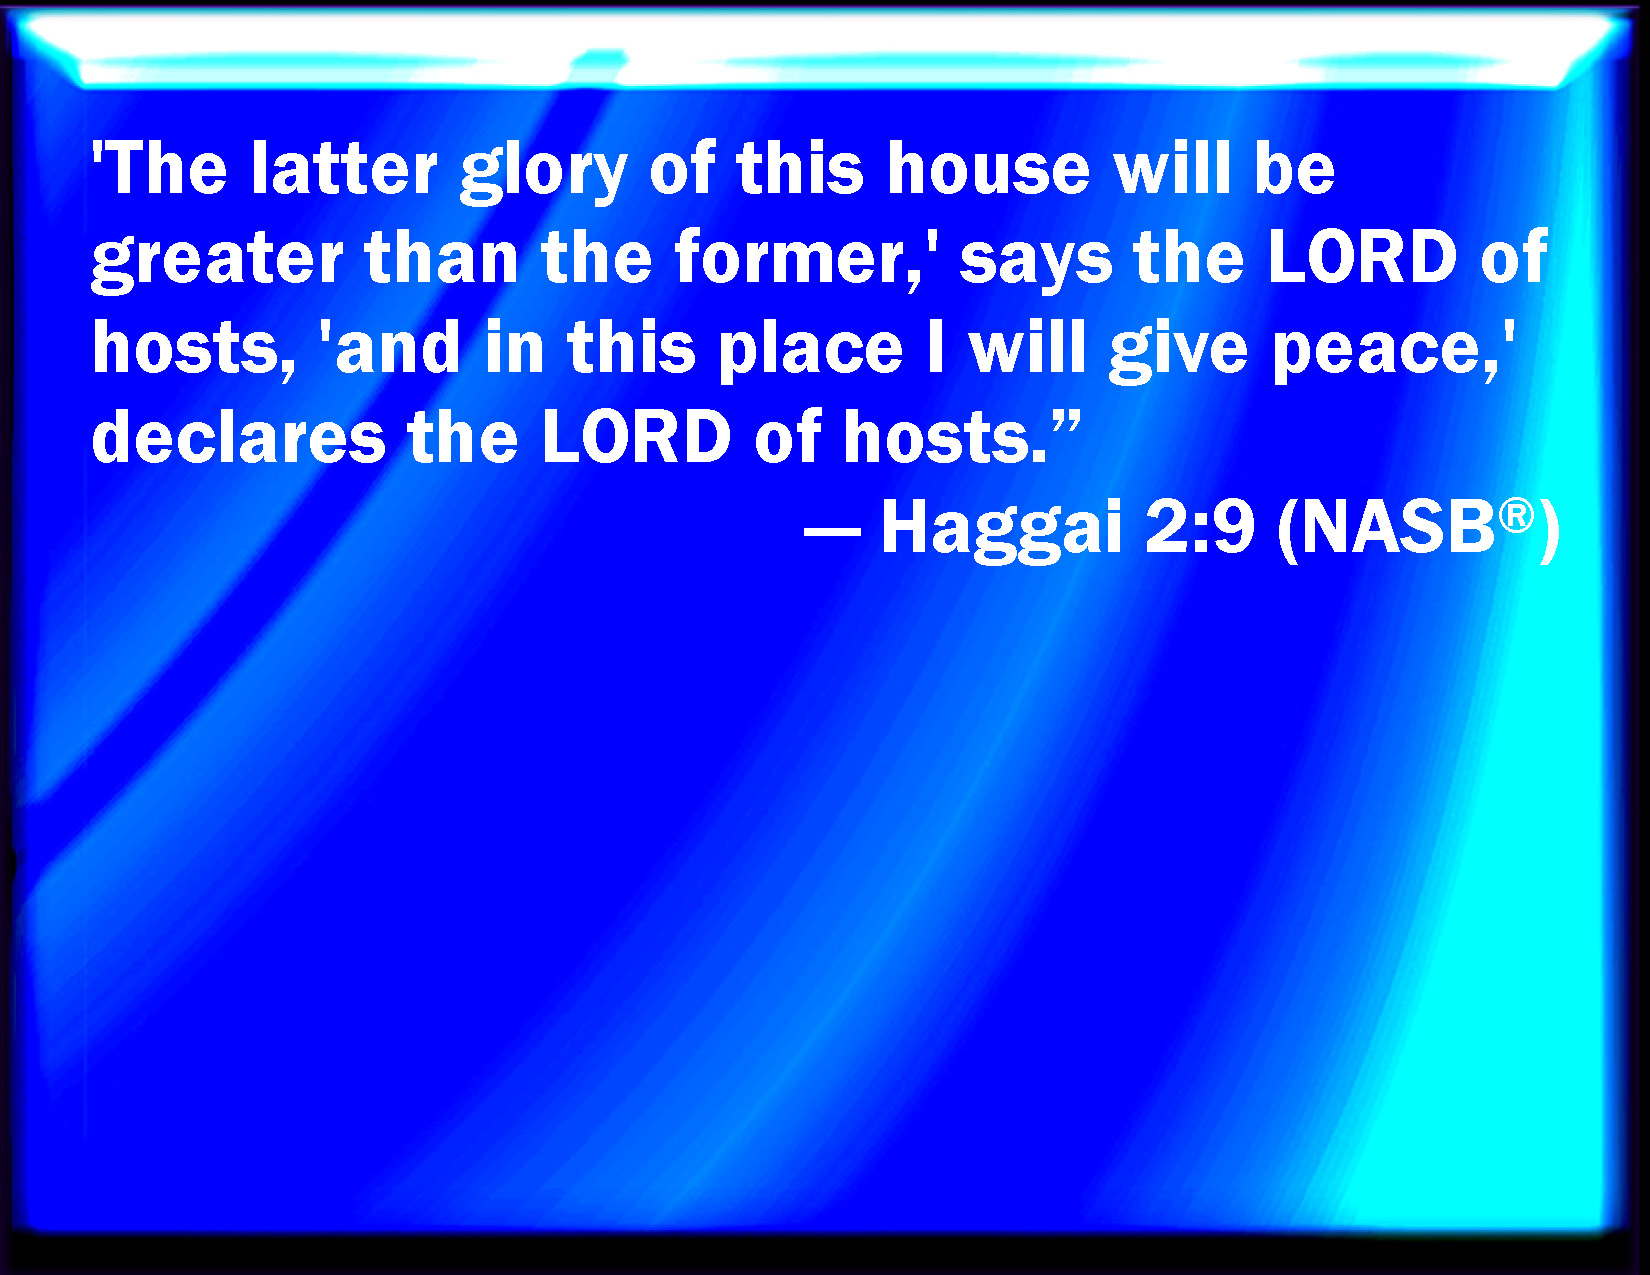 haggai-2-9-the-glory-of-this-latter-house-shall-be-greater-than-of-the